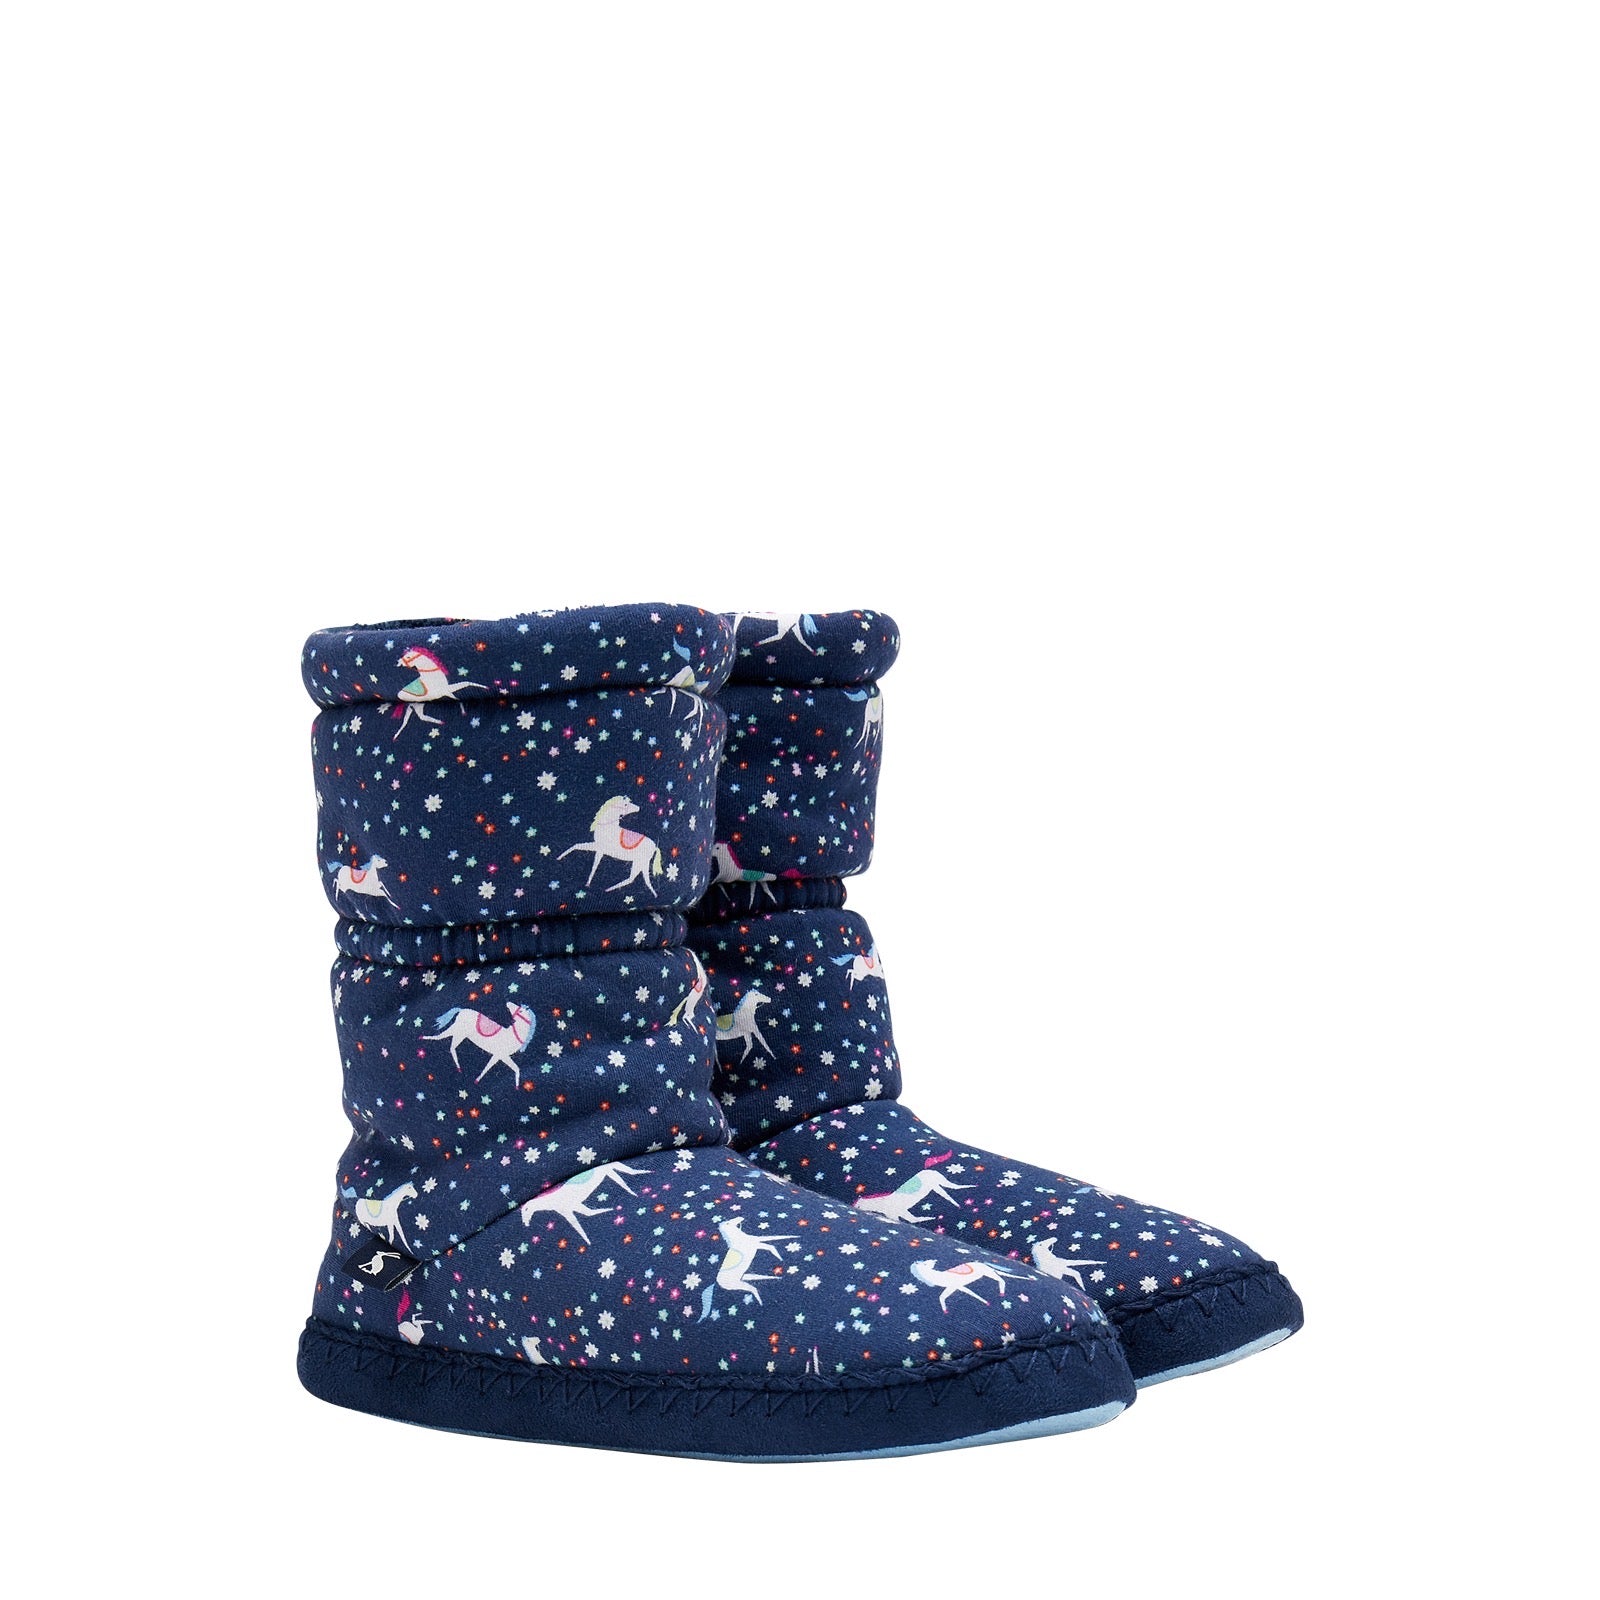 Joules Padabout Slippers Star Horse 216663 Footwear UK 8-9 / Navy,UK 10-11 / Navy,UK 12-13 / Navy,UK 1-2 / Navy,UK 3-4 / Navy